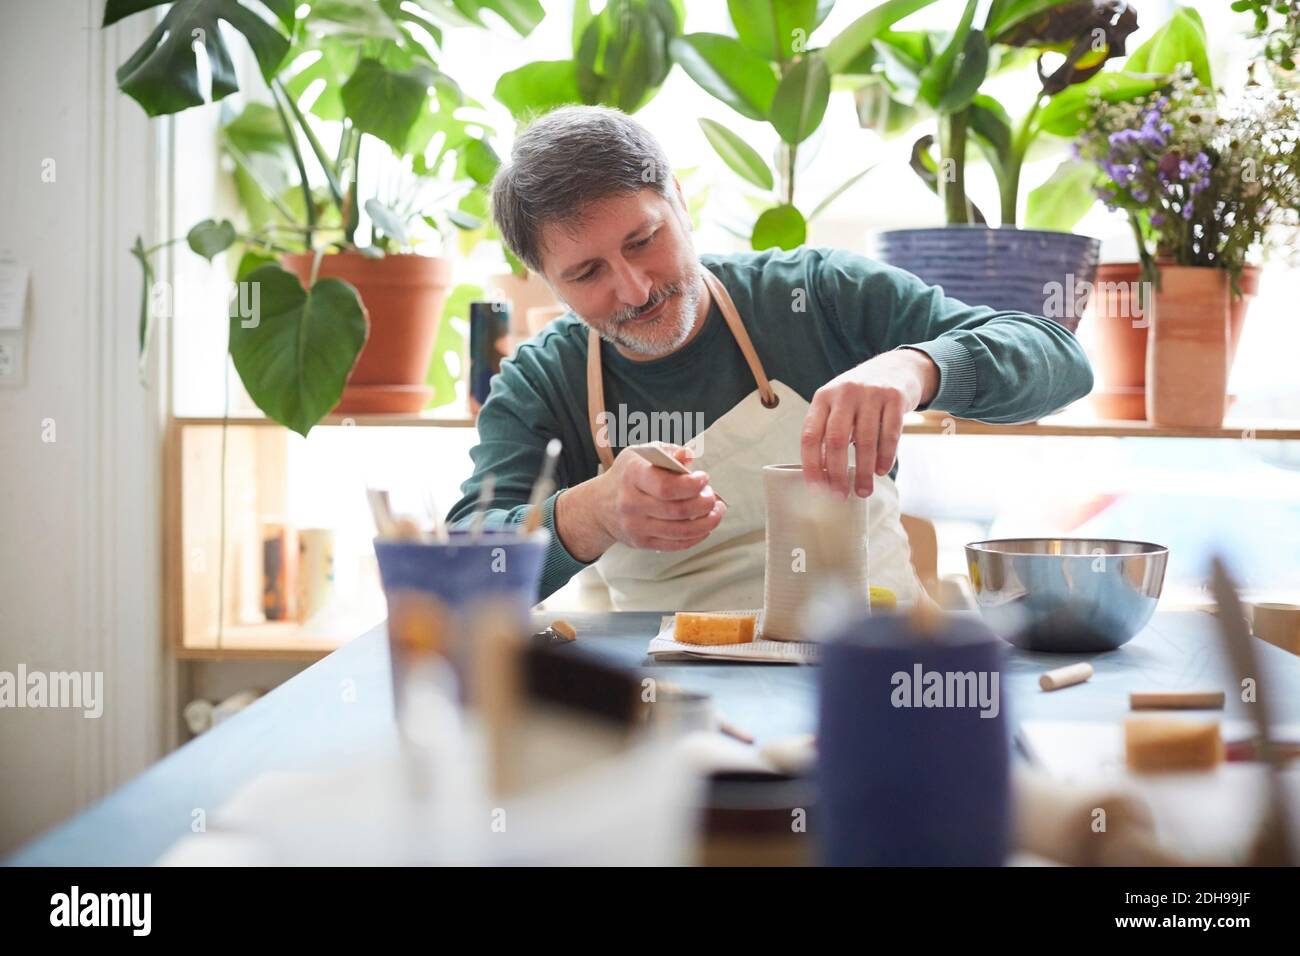 Mature man making craft product in pottery class Stock Photo